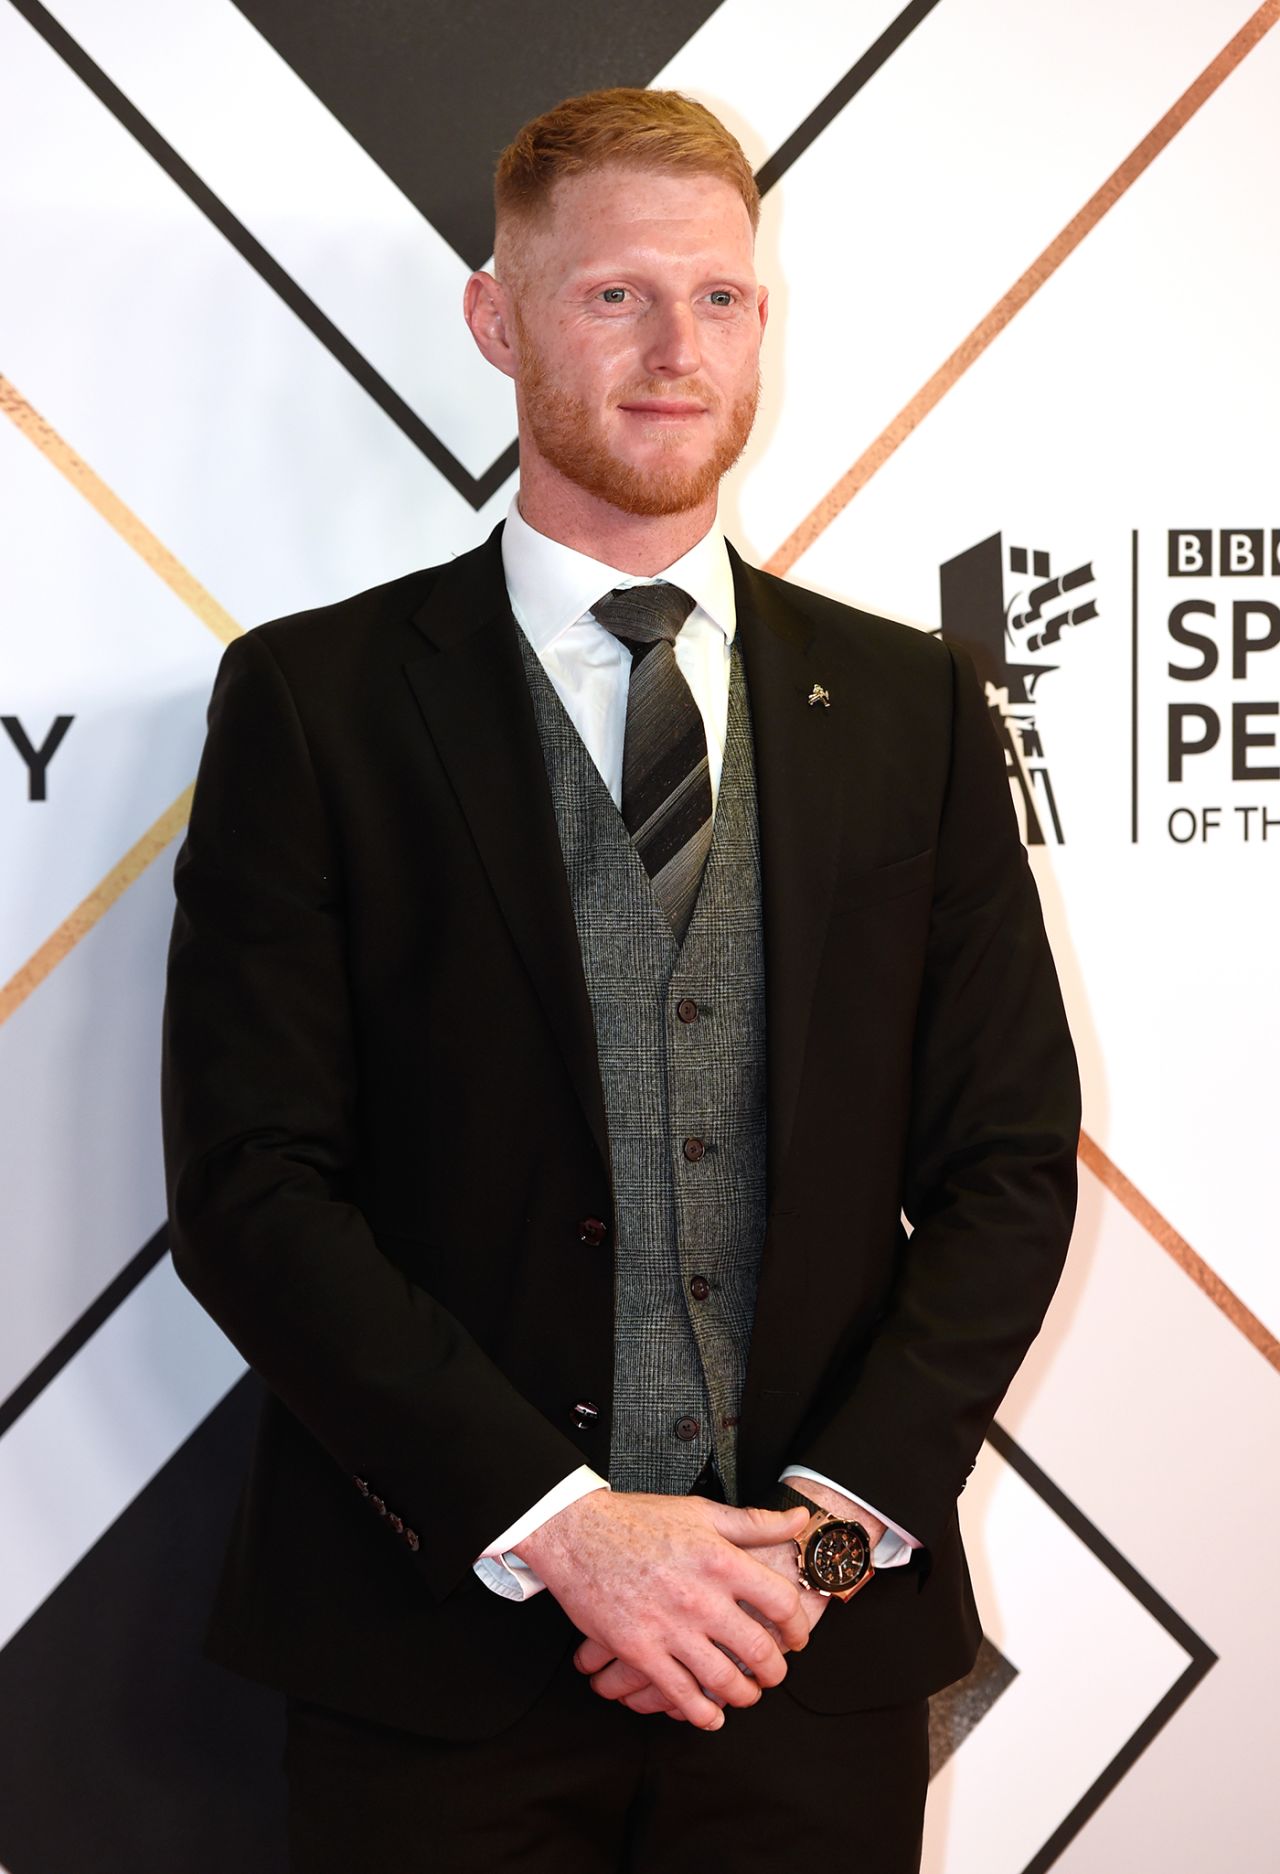 Ben Stokes poses for photographs on arrival at the Sports Personality of the Year awards